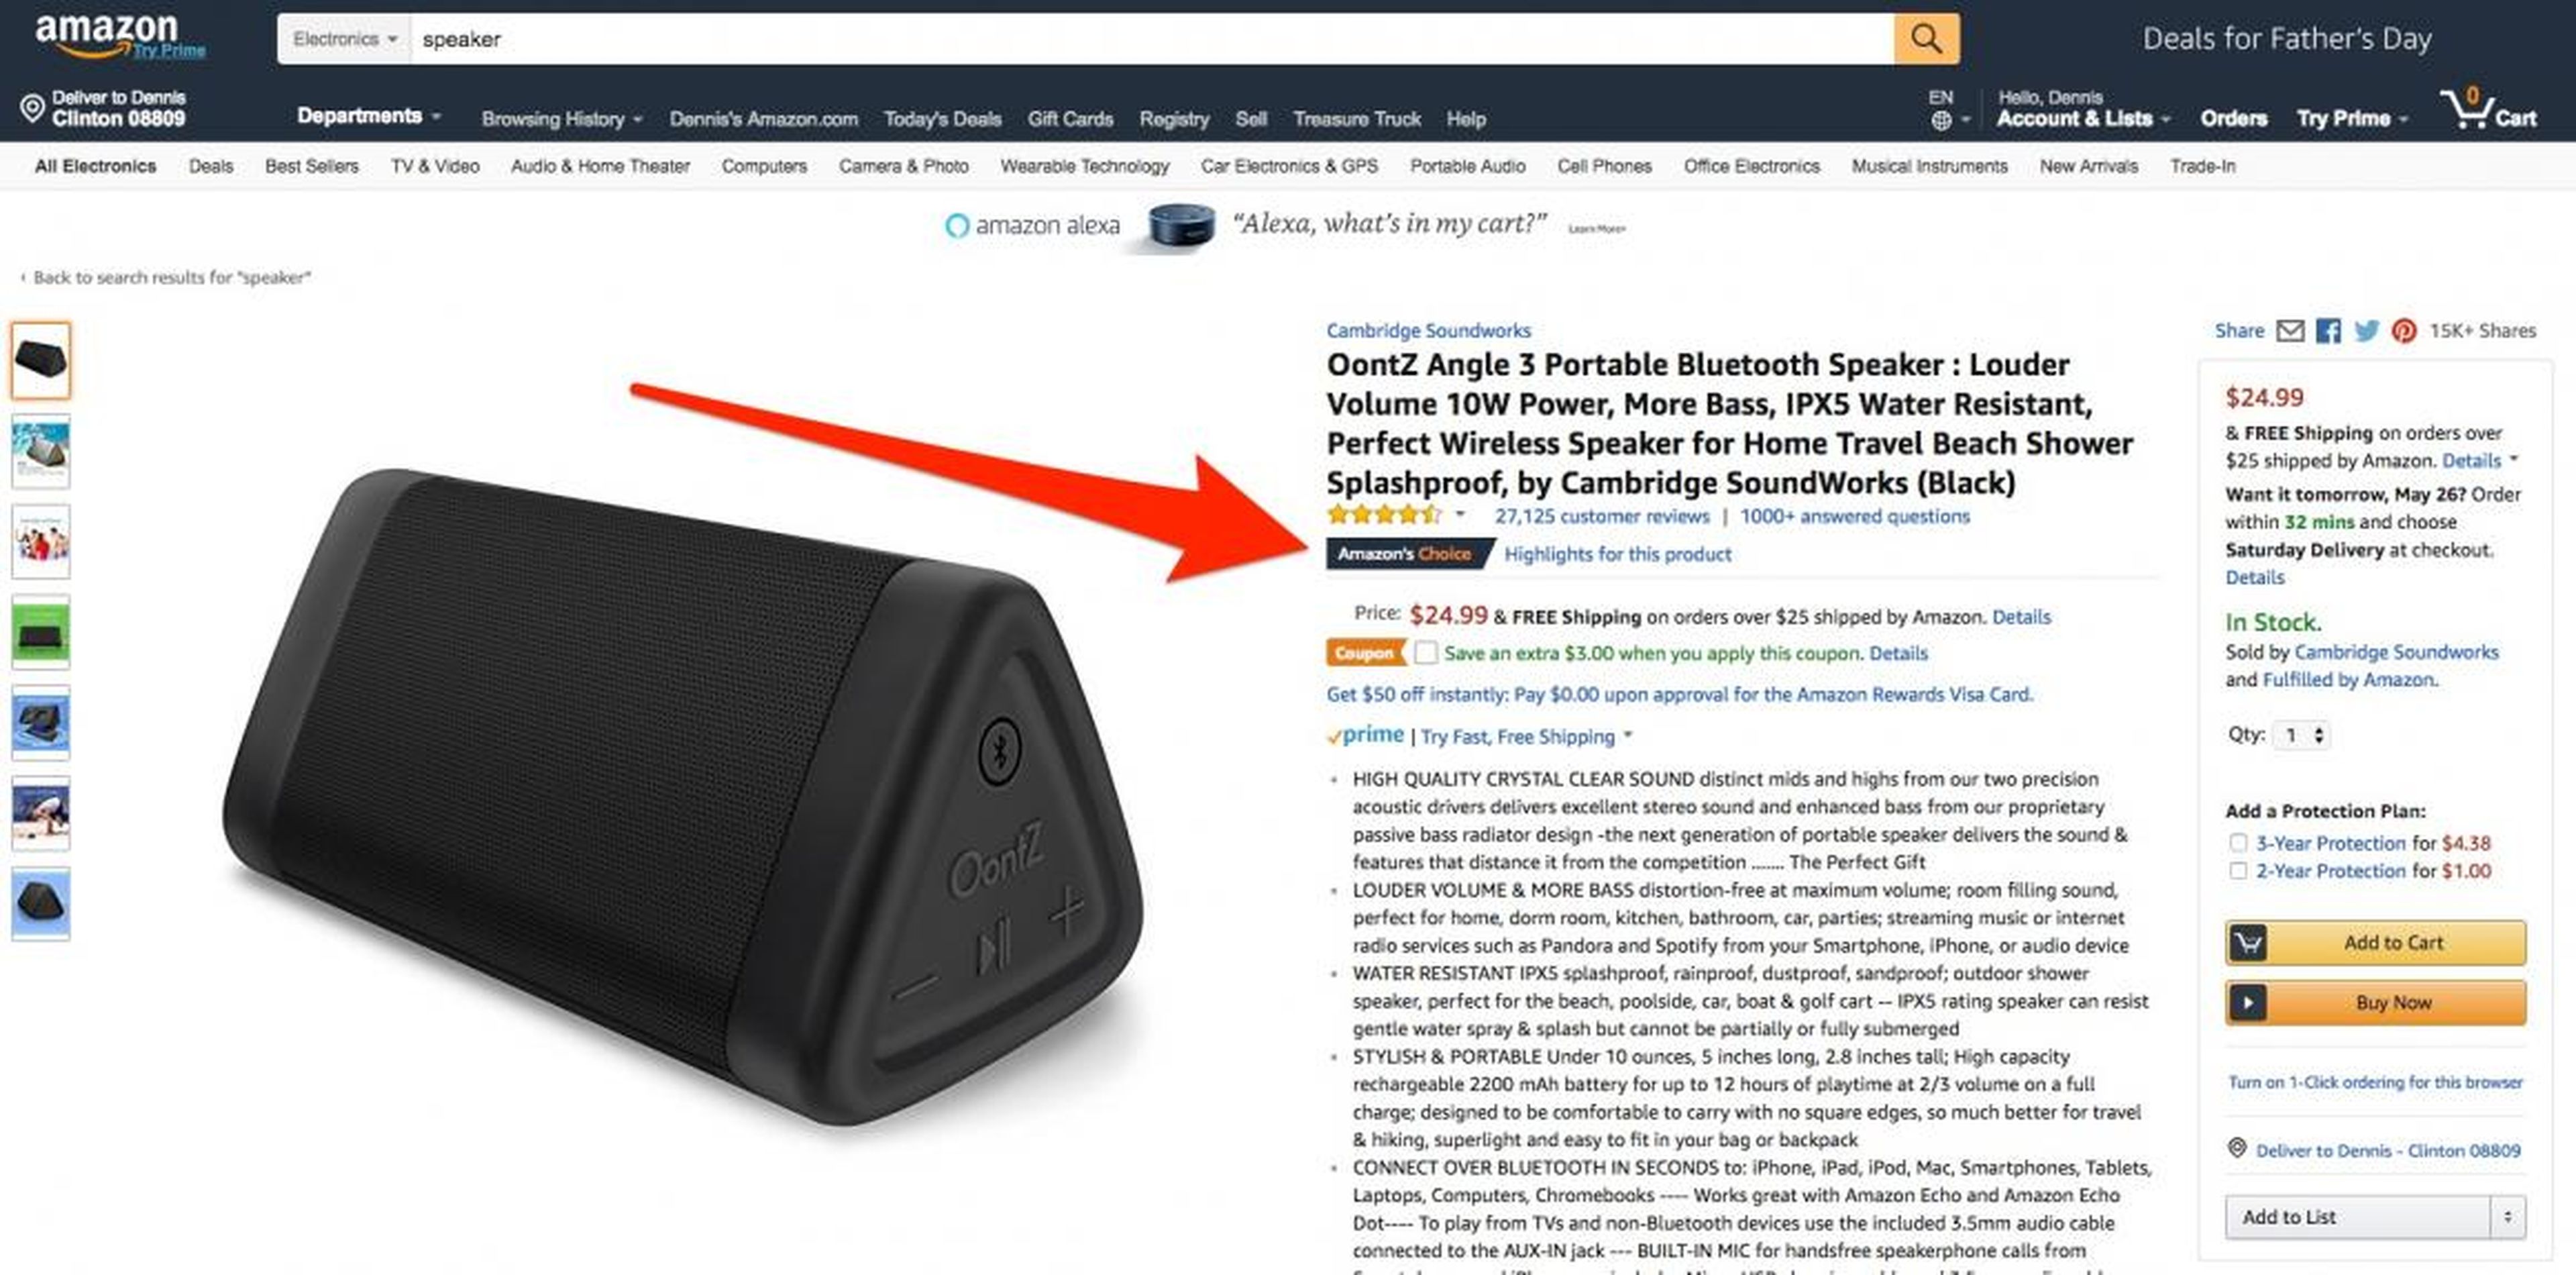 Here's what it means when an item is marked 'Amazon's Choice'